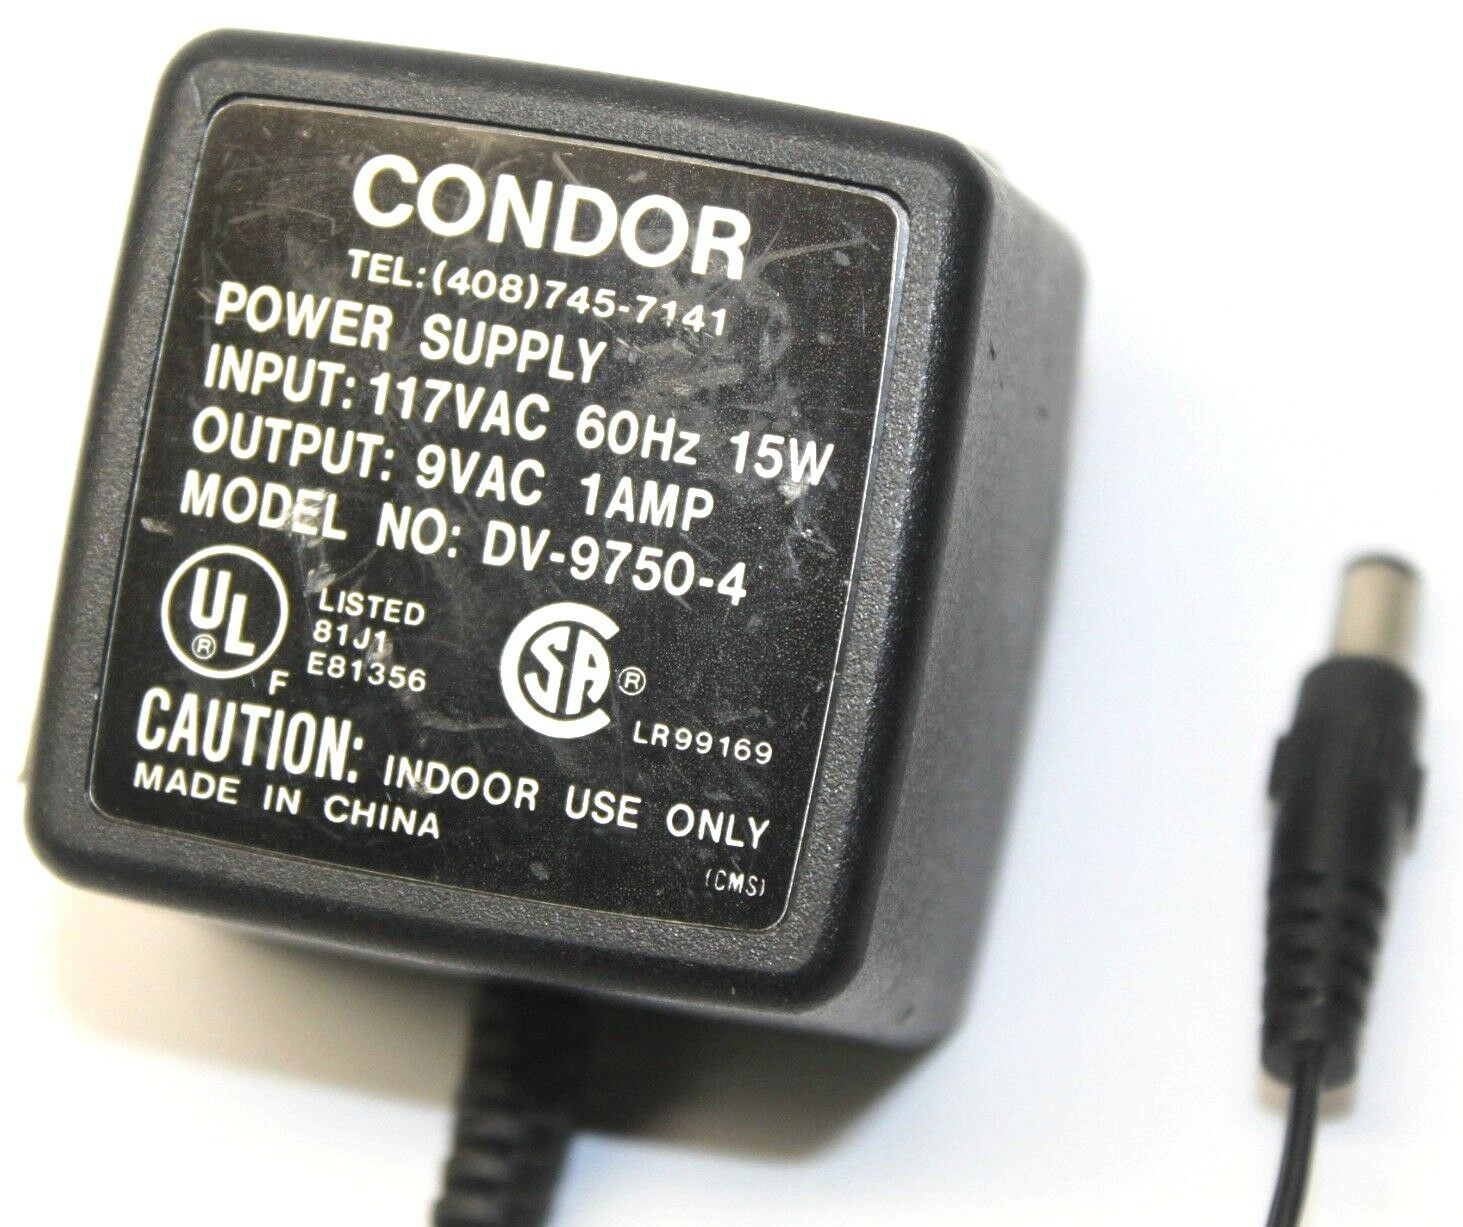 New Condor DV-9750-4 AC Adapter Power Supply Charger Cord 9V AC 1 Amps 9Volts 1A